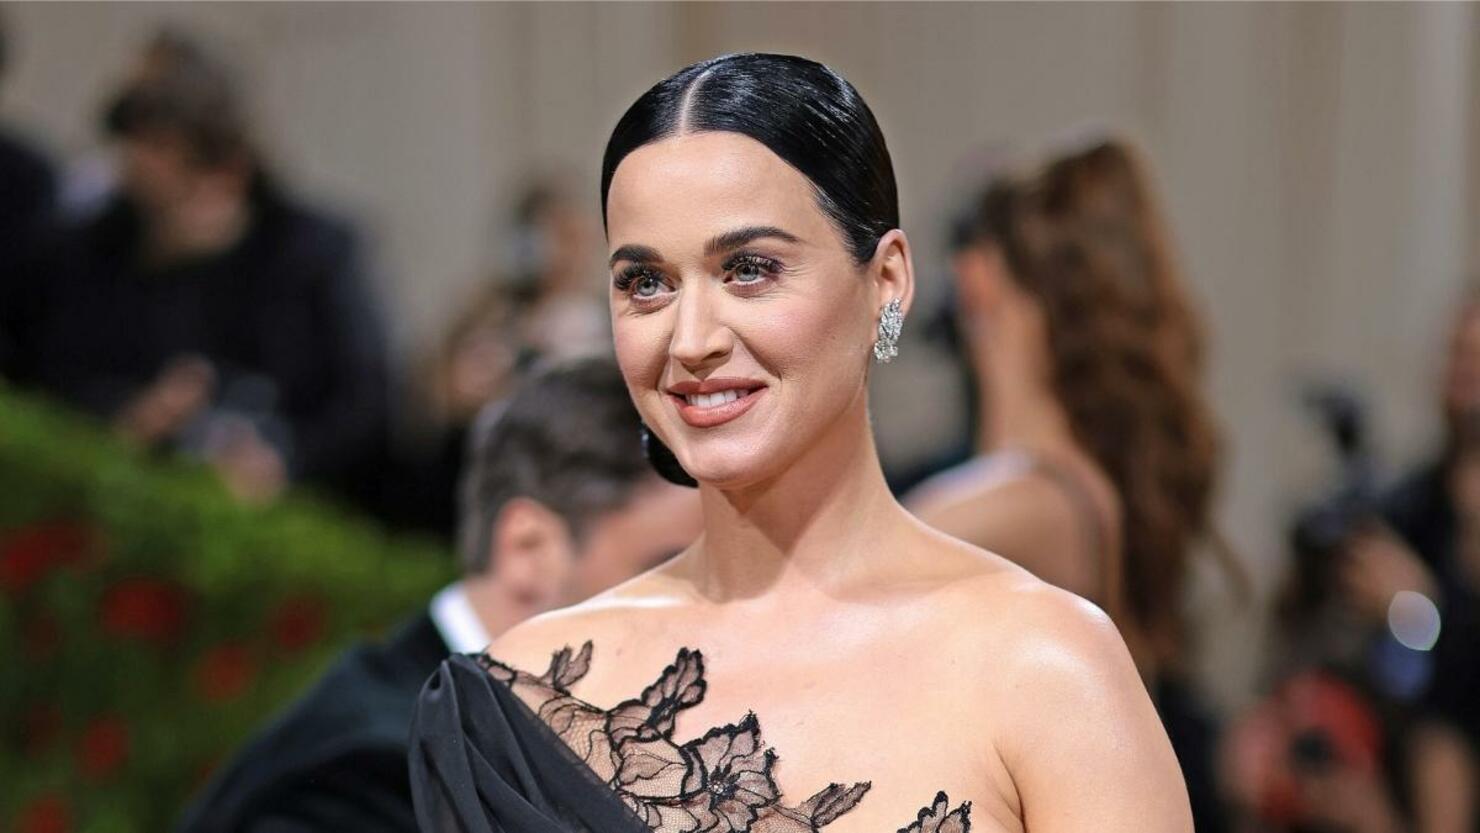 Katy Perry Shares Sweet Family Photo To Celebrate 38th Birthday | iHeart